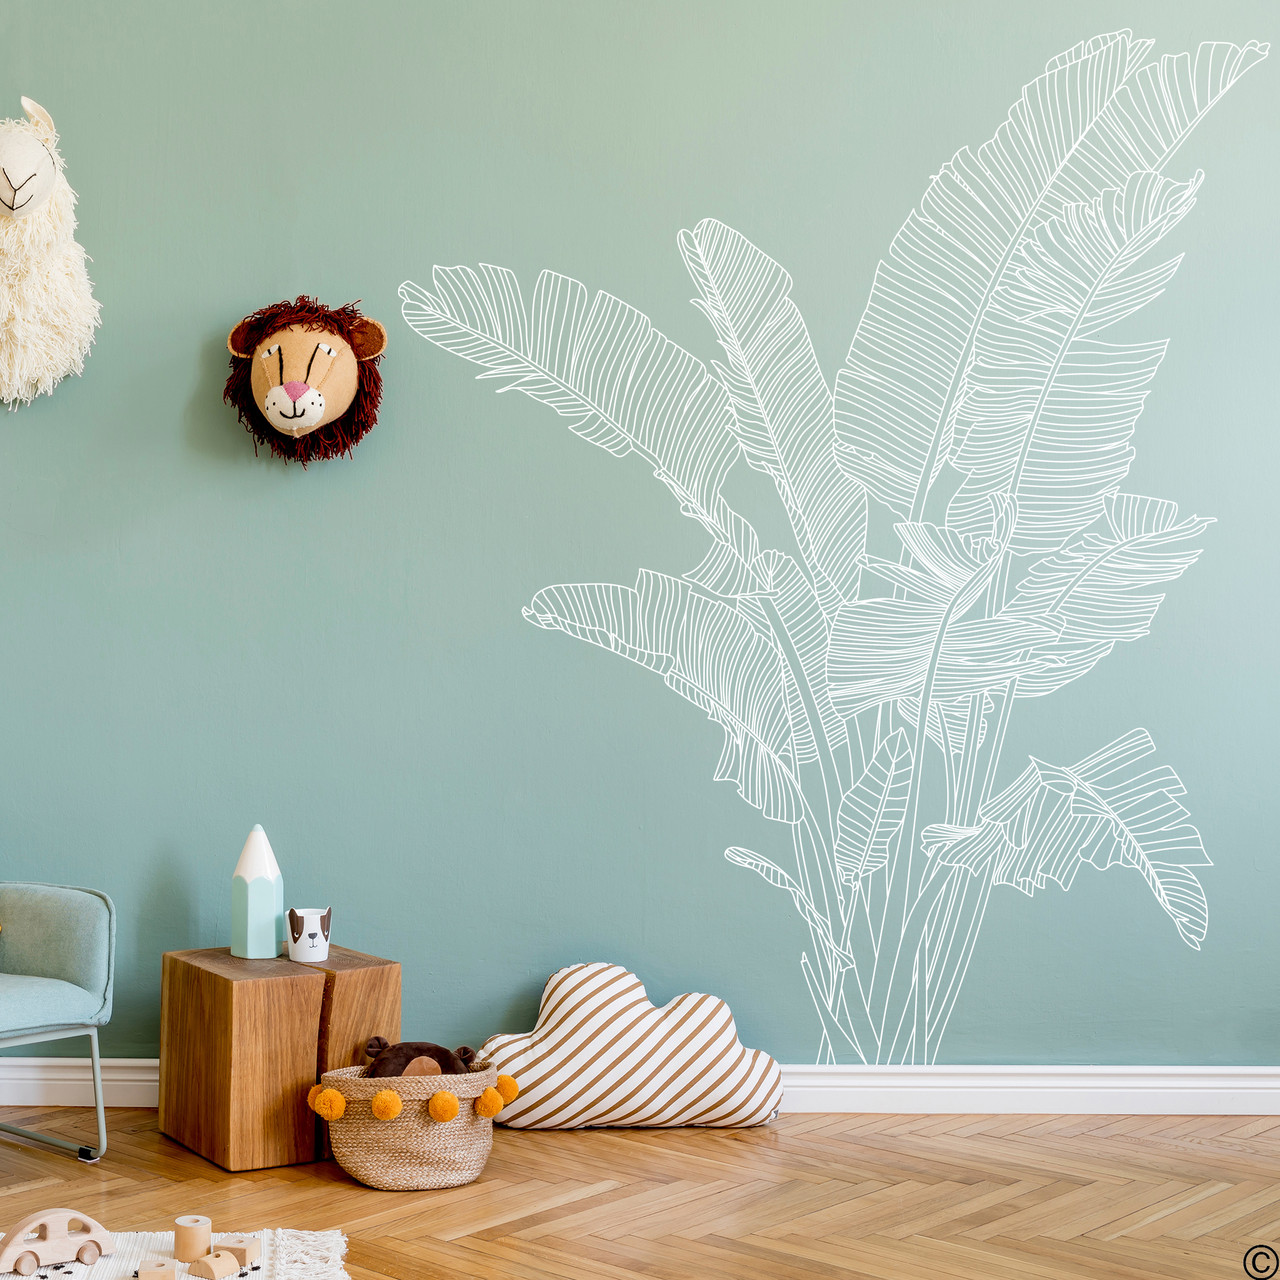 The Bird of Paradise wall decal shown here in white vinyl color on a nursery room wall.